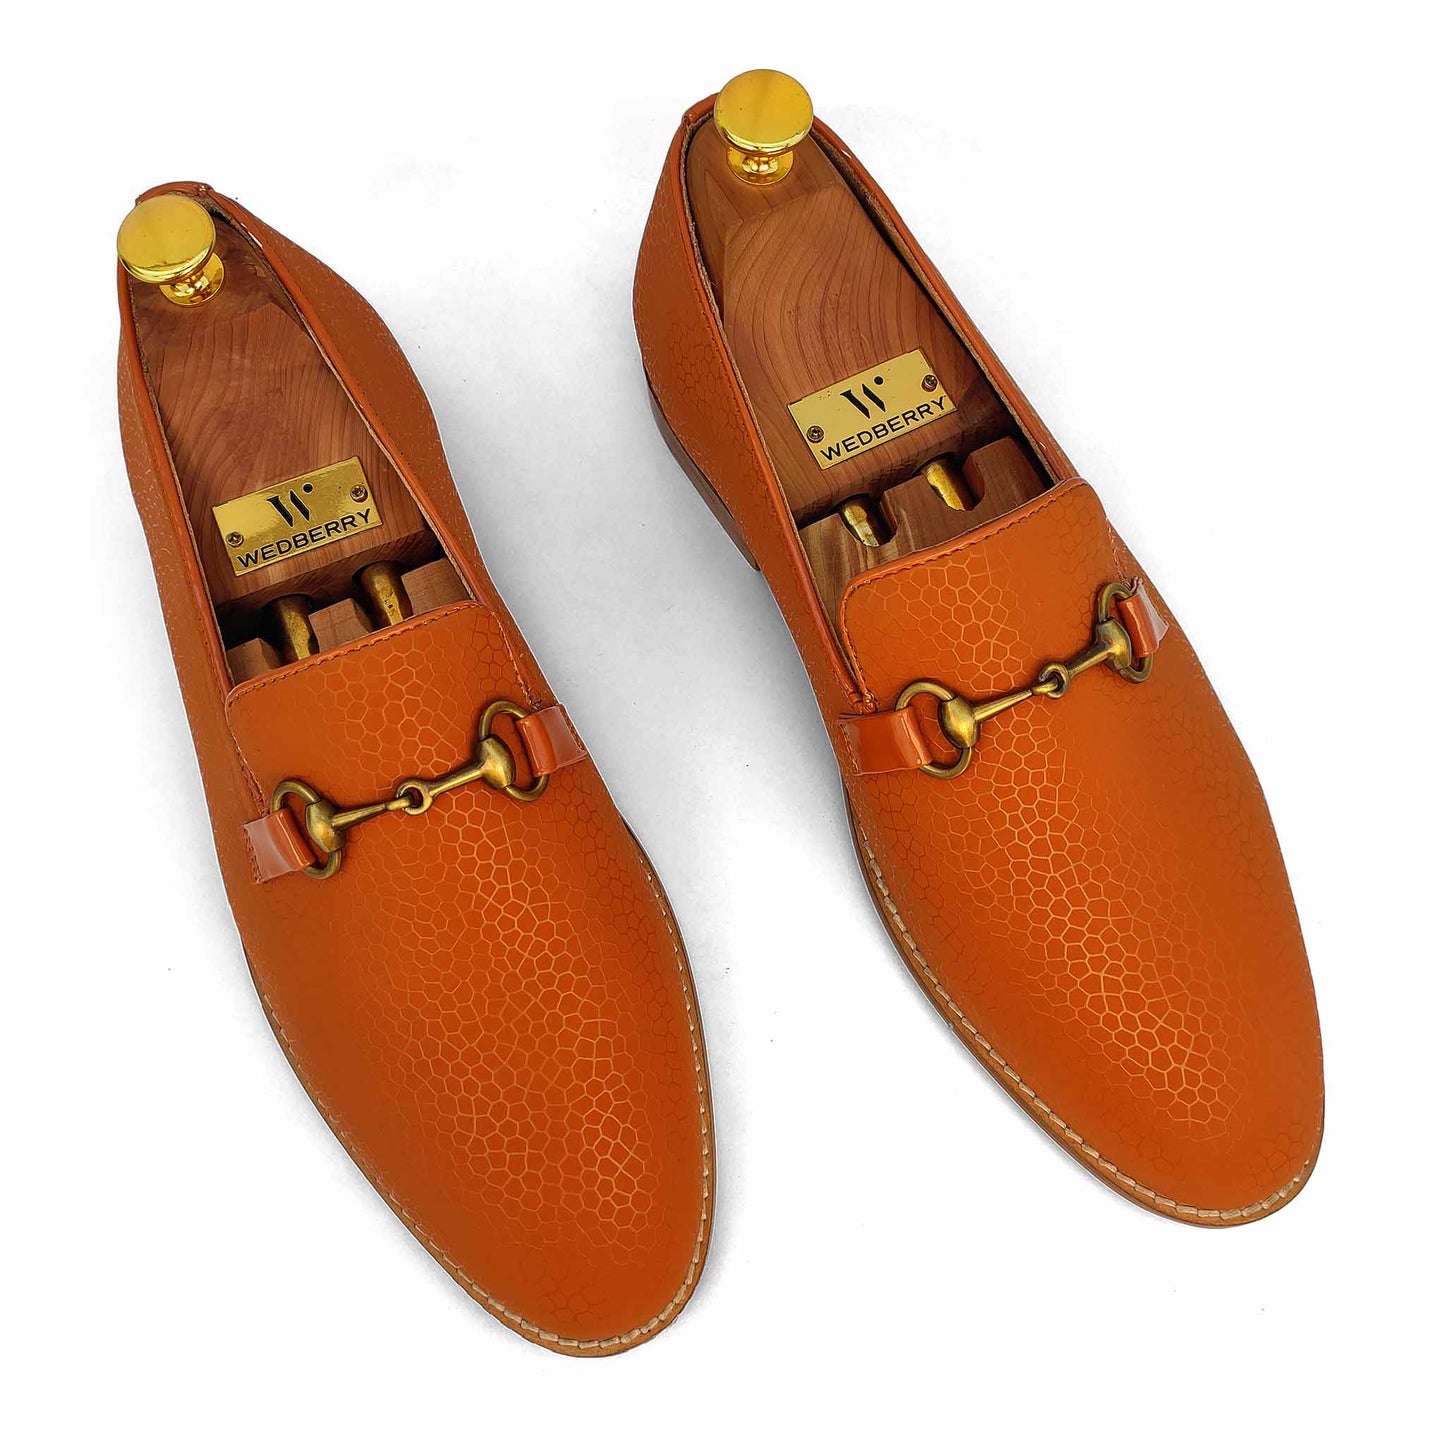 Tan Spidy Antique Buckle Wedding Ethnic Party Shoes Loafer for Men